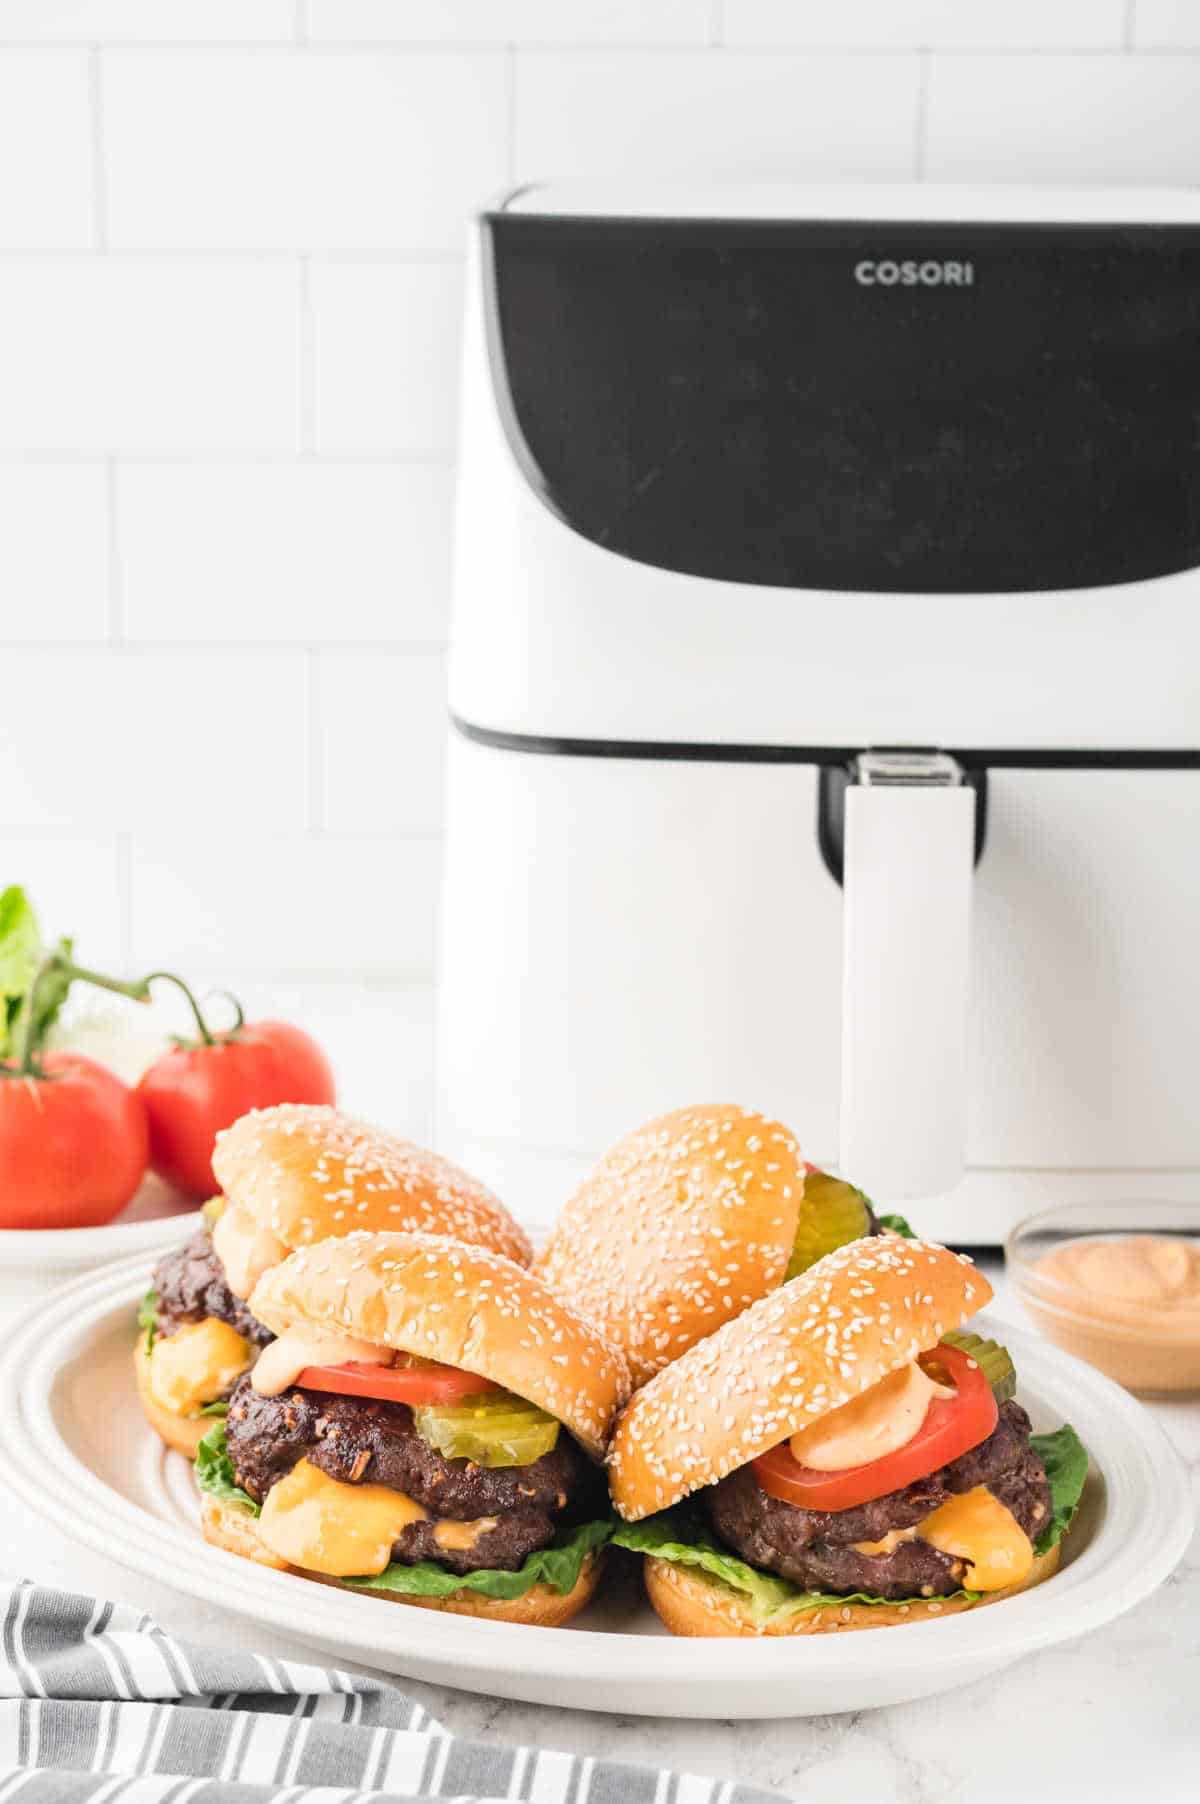 Juicy lucy burgers on a plate in front of a white air fryer.